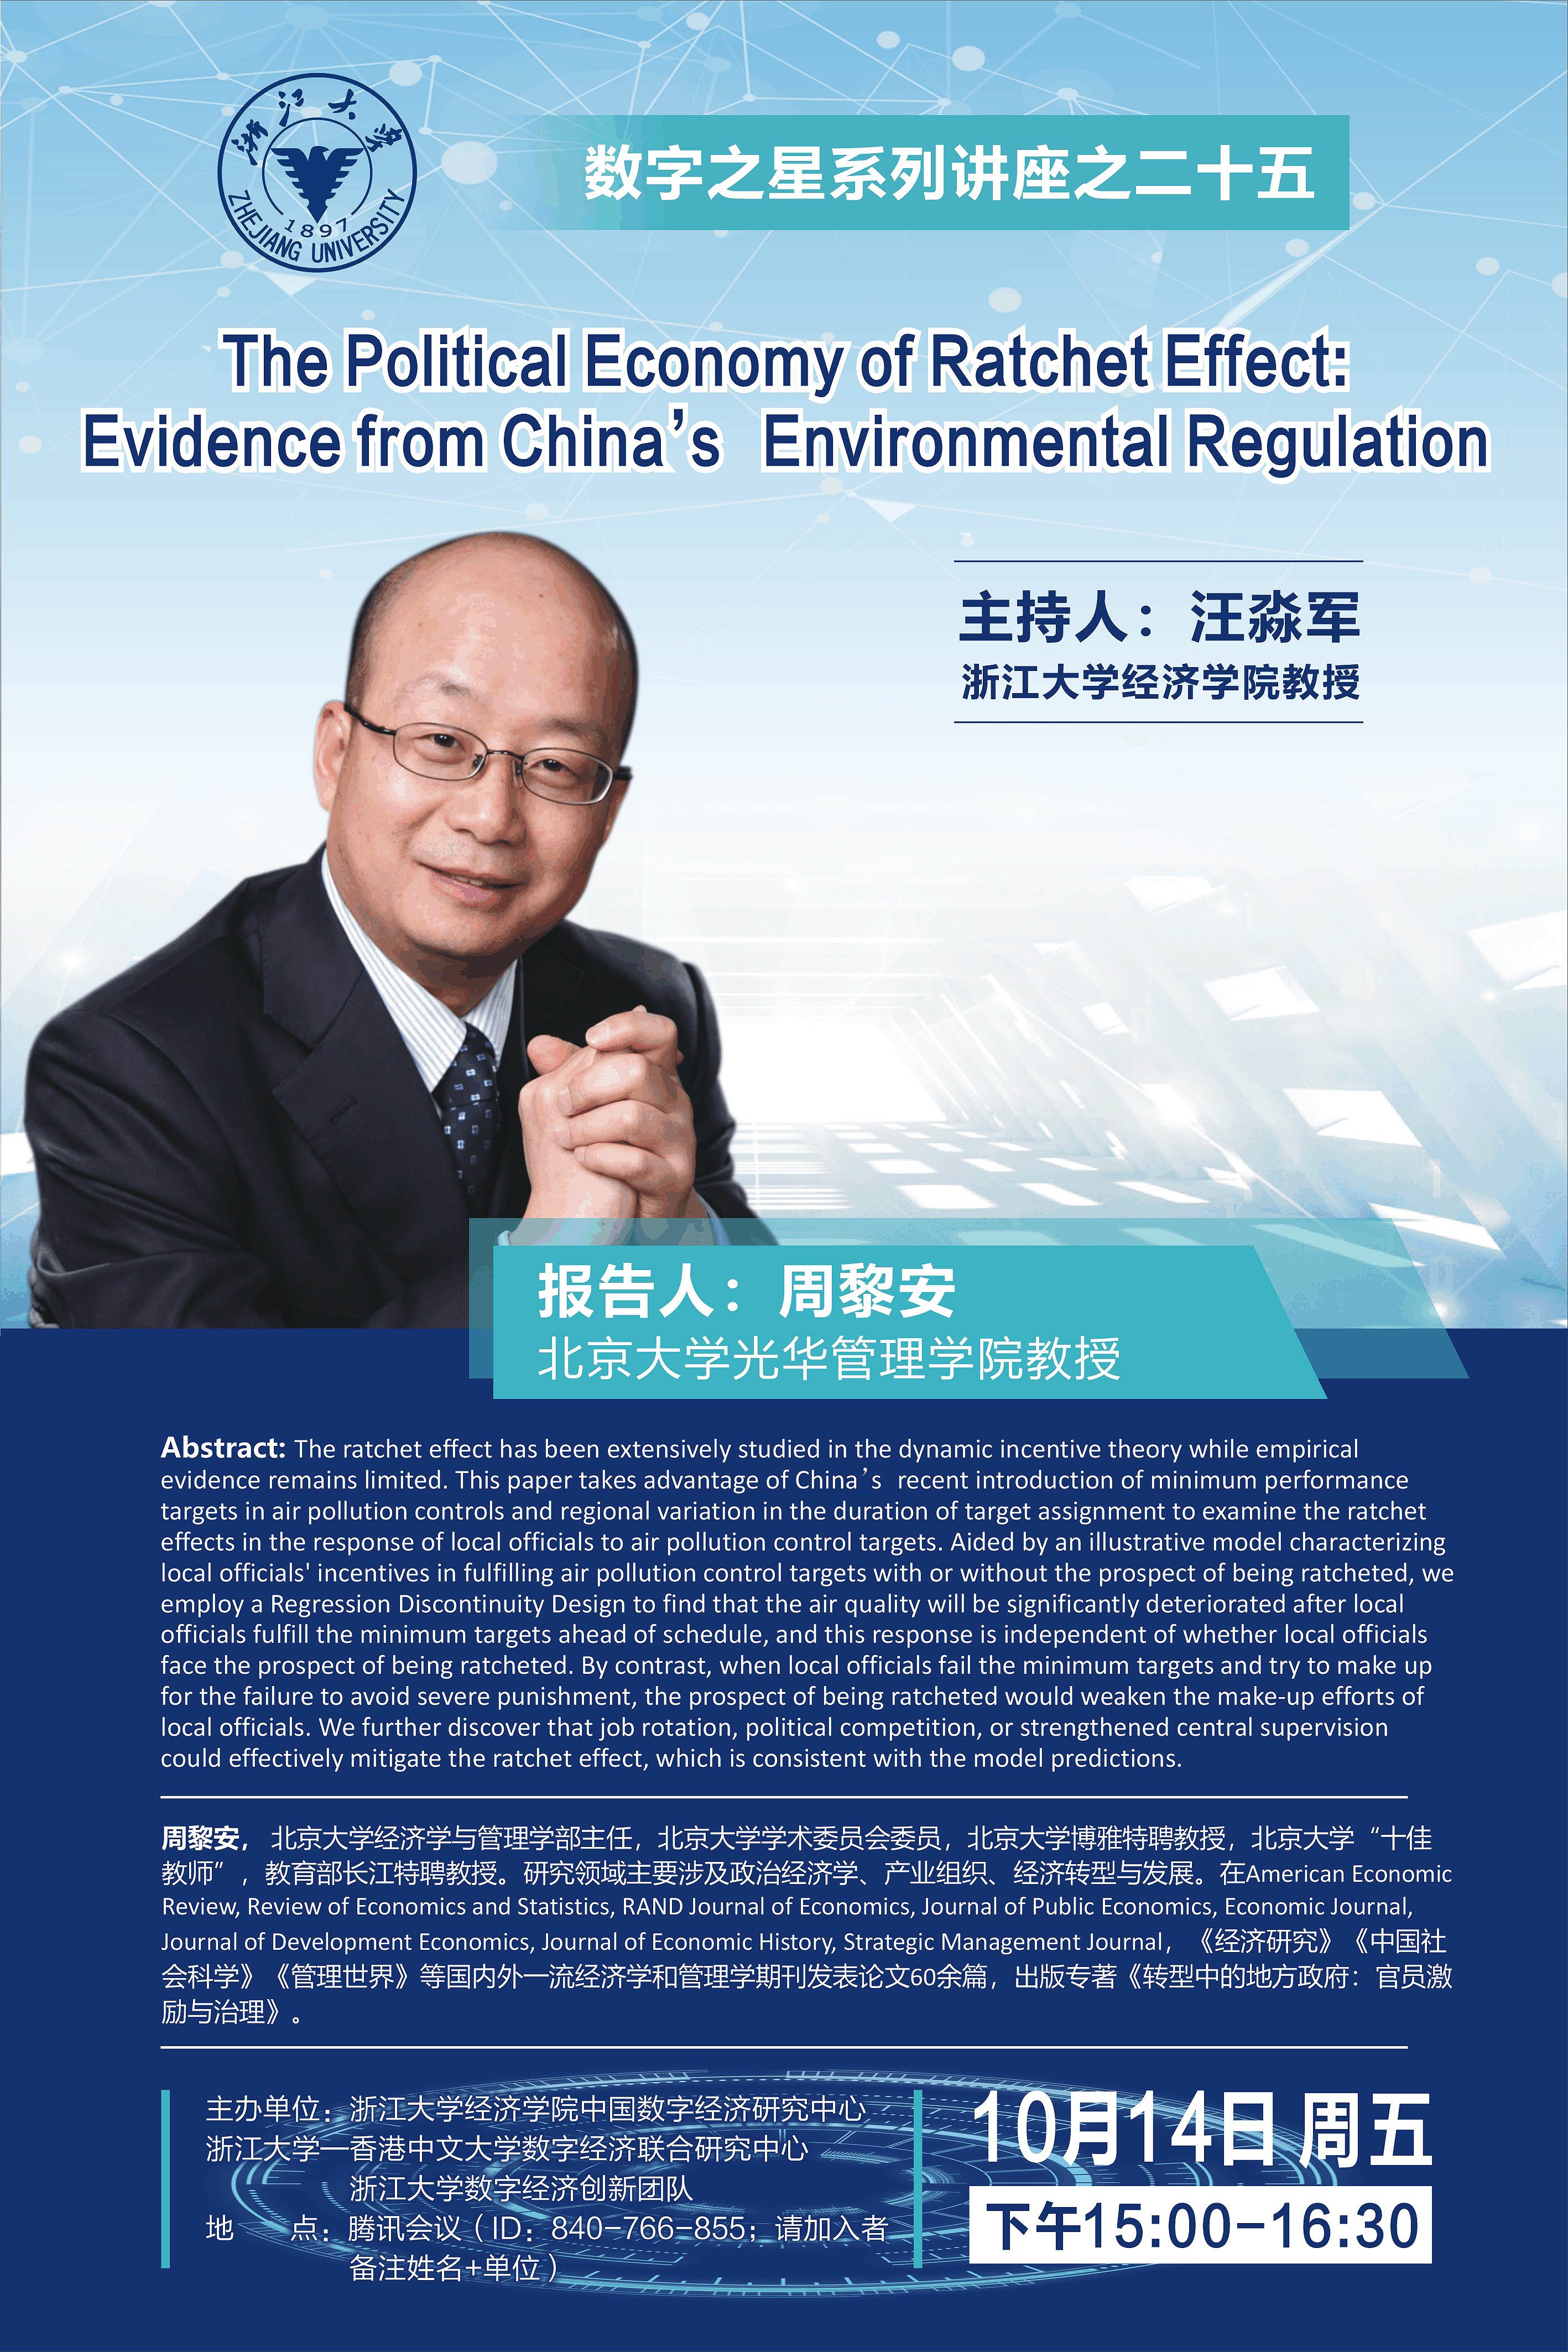 【 The Digital Star Seminar Series No.25 】The Political Economy of Ratchet Effect: Evidence from China’s Environmental Regulation